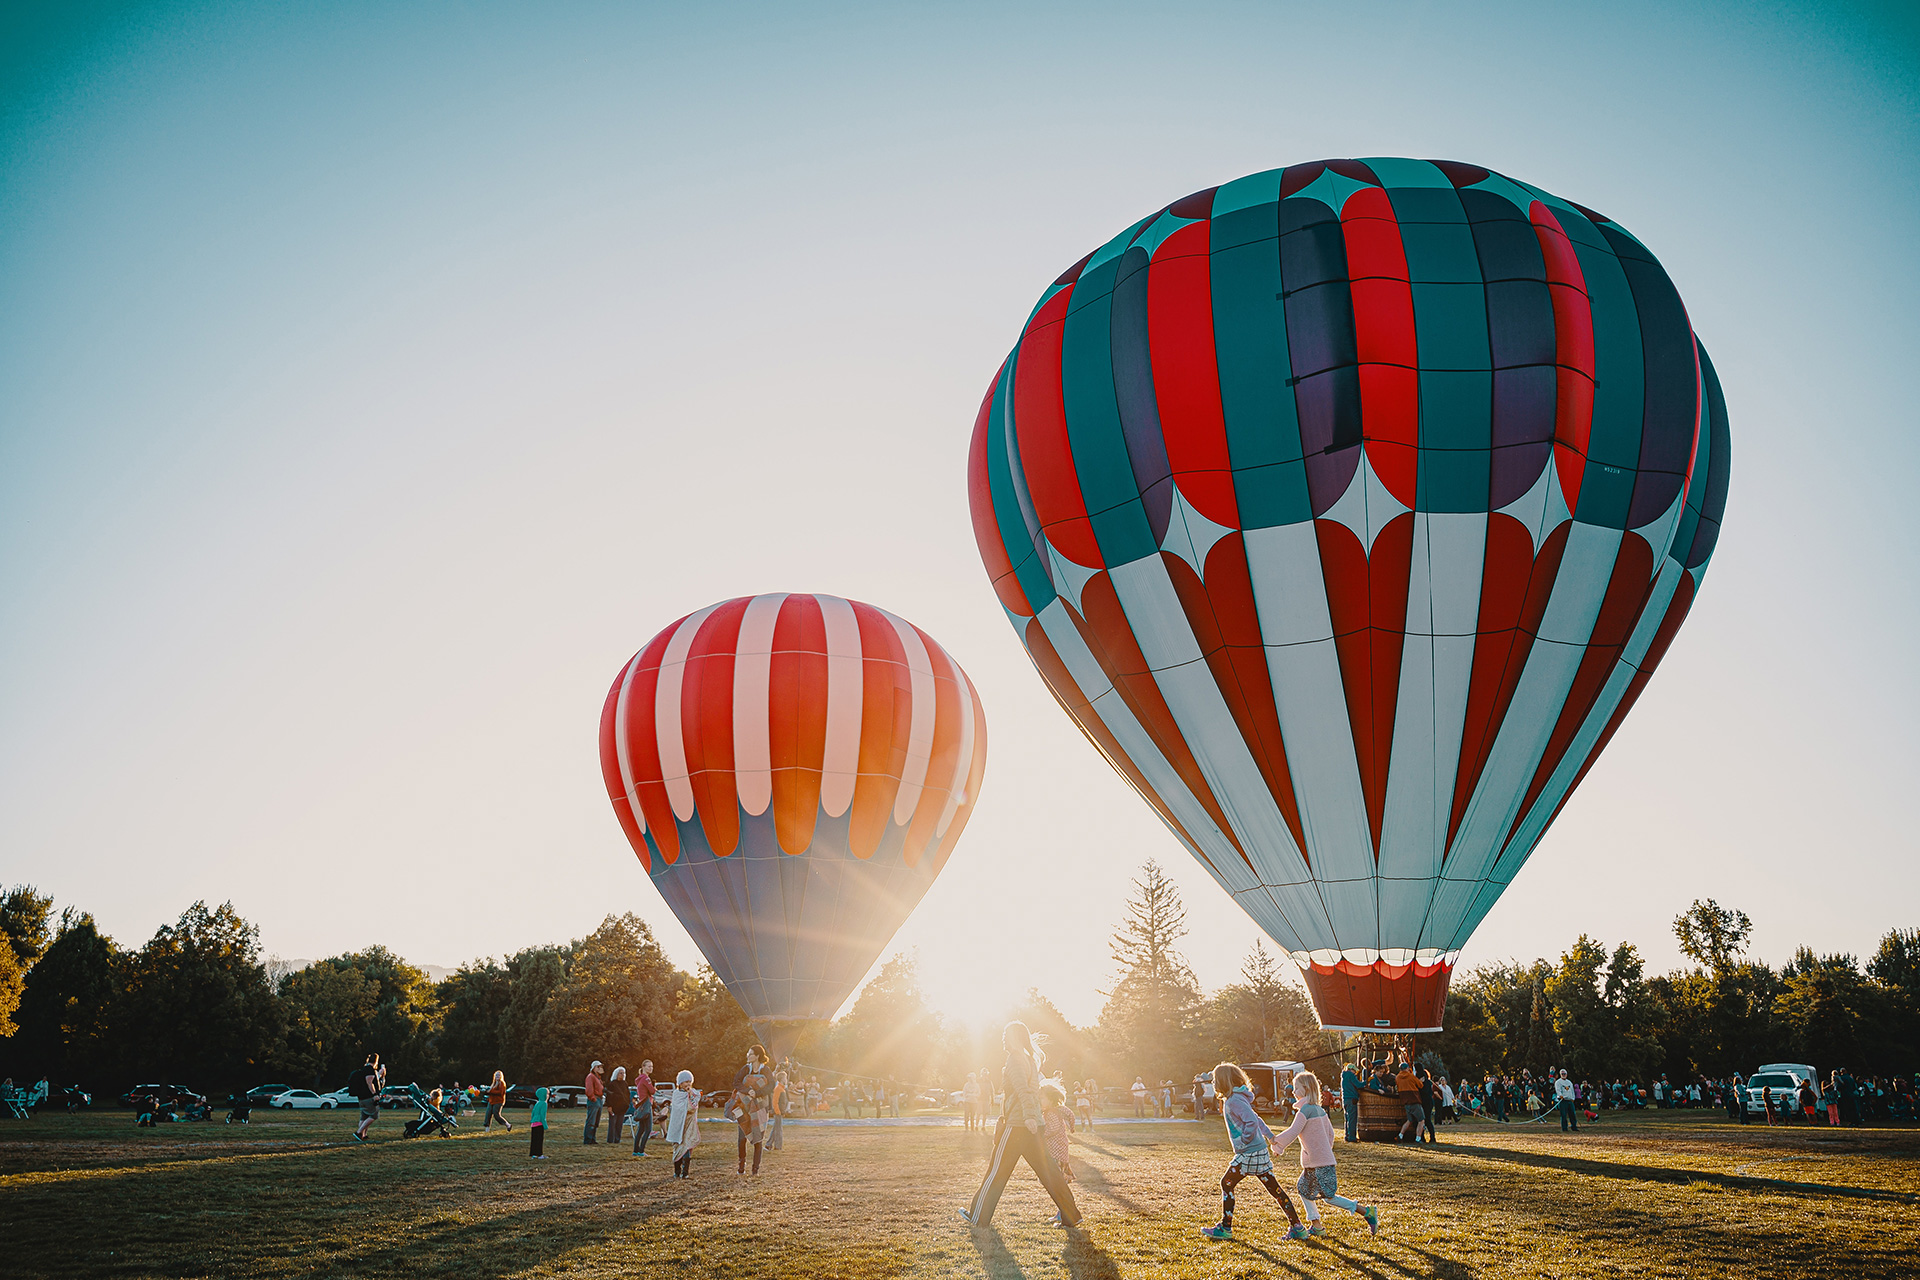 Two hot air balloon surrounded by people in a field about to take off at sunset.